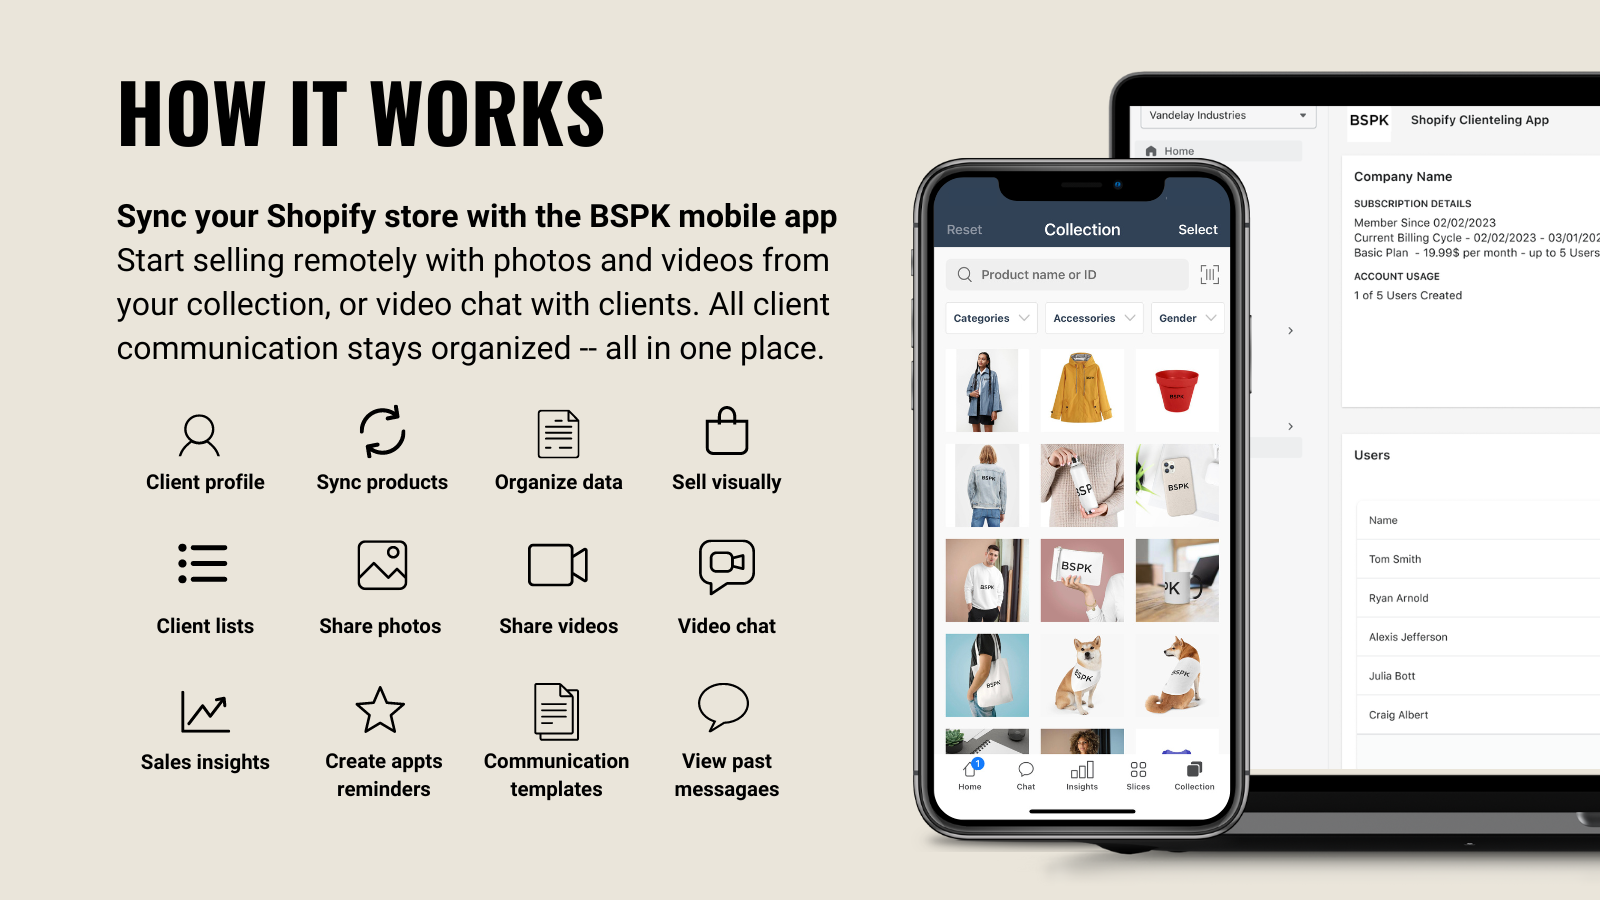 Sync your Shopify Collection to BSPK